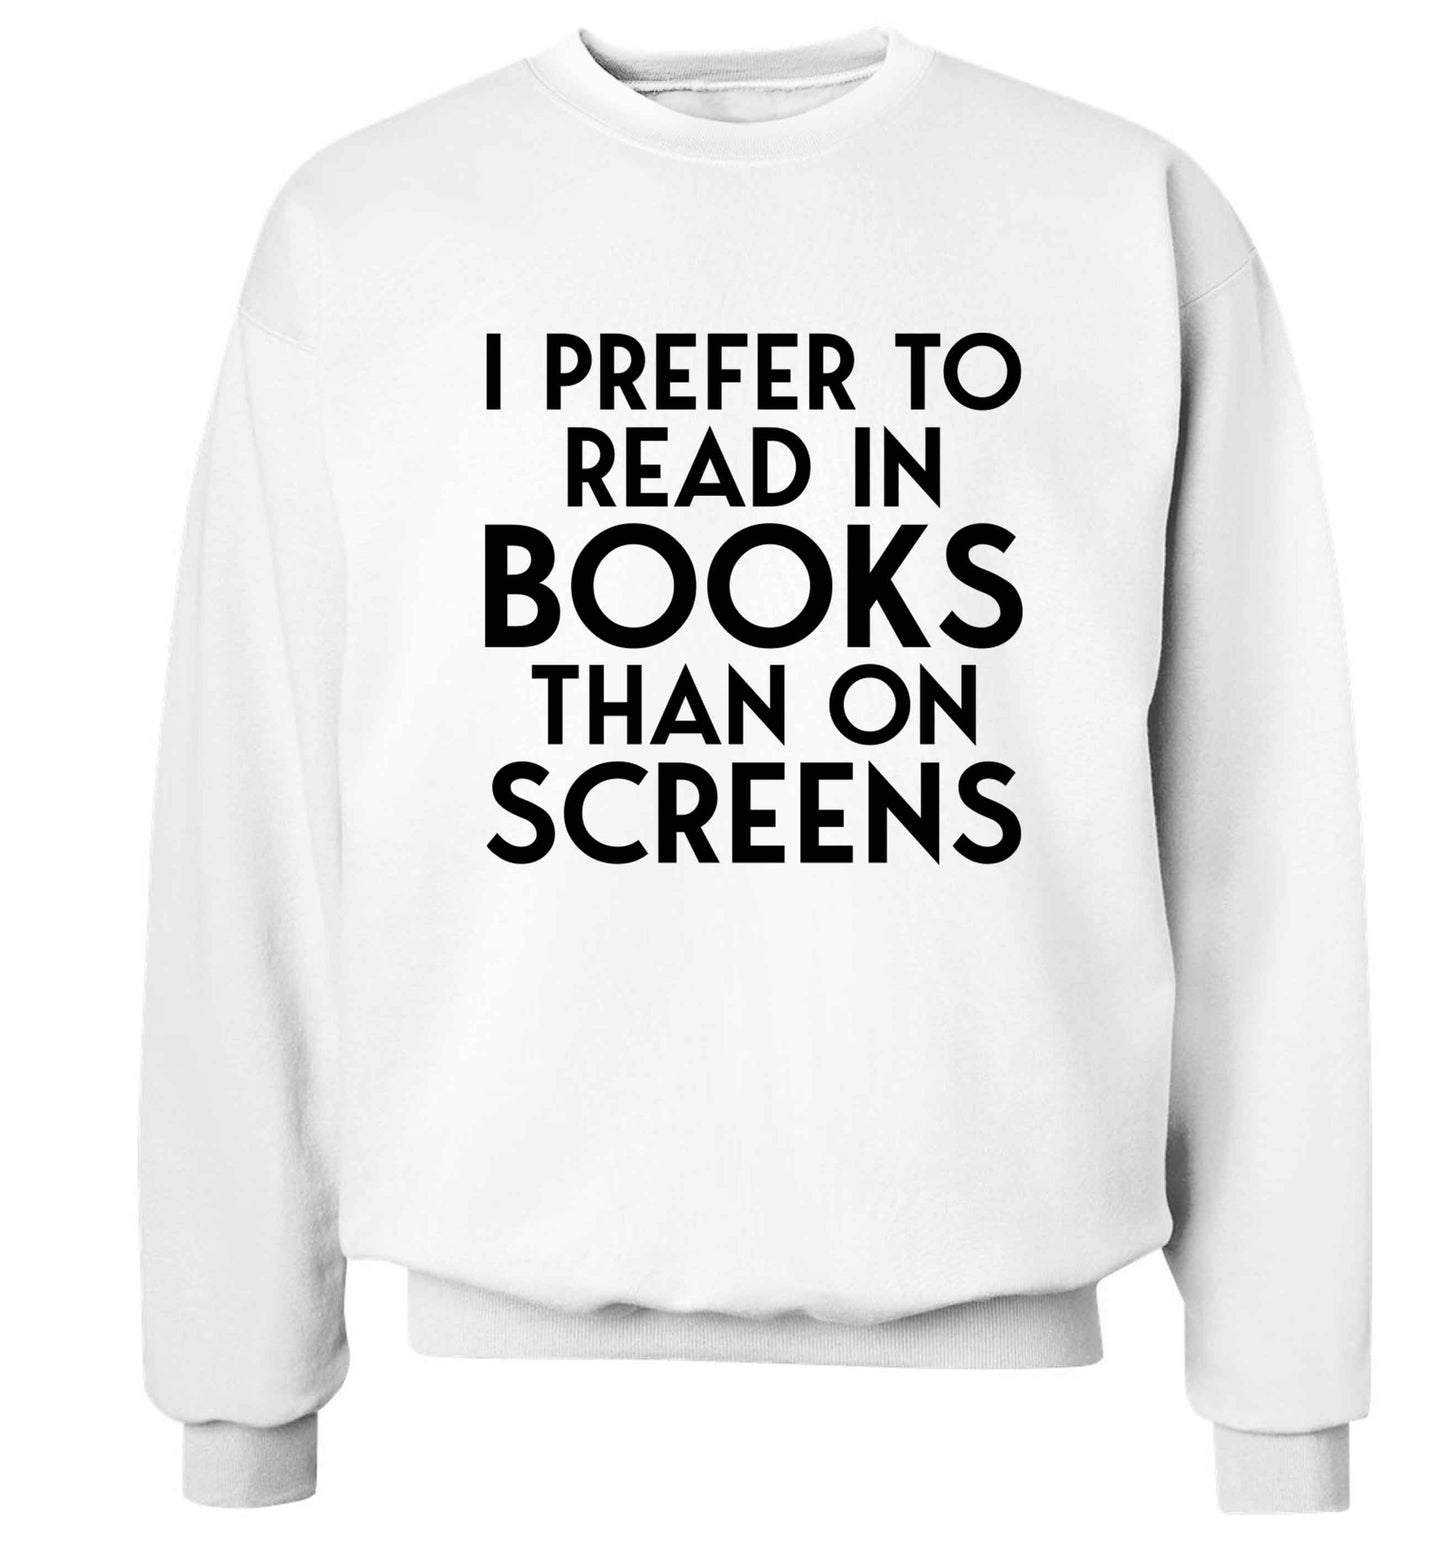 I prefer to read in books than on screens Adult's unisex white Sweater 2XL